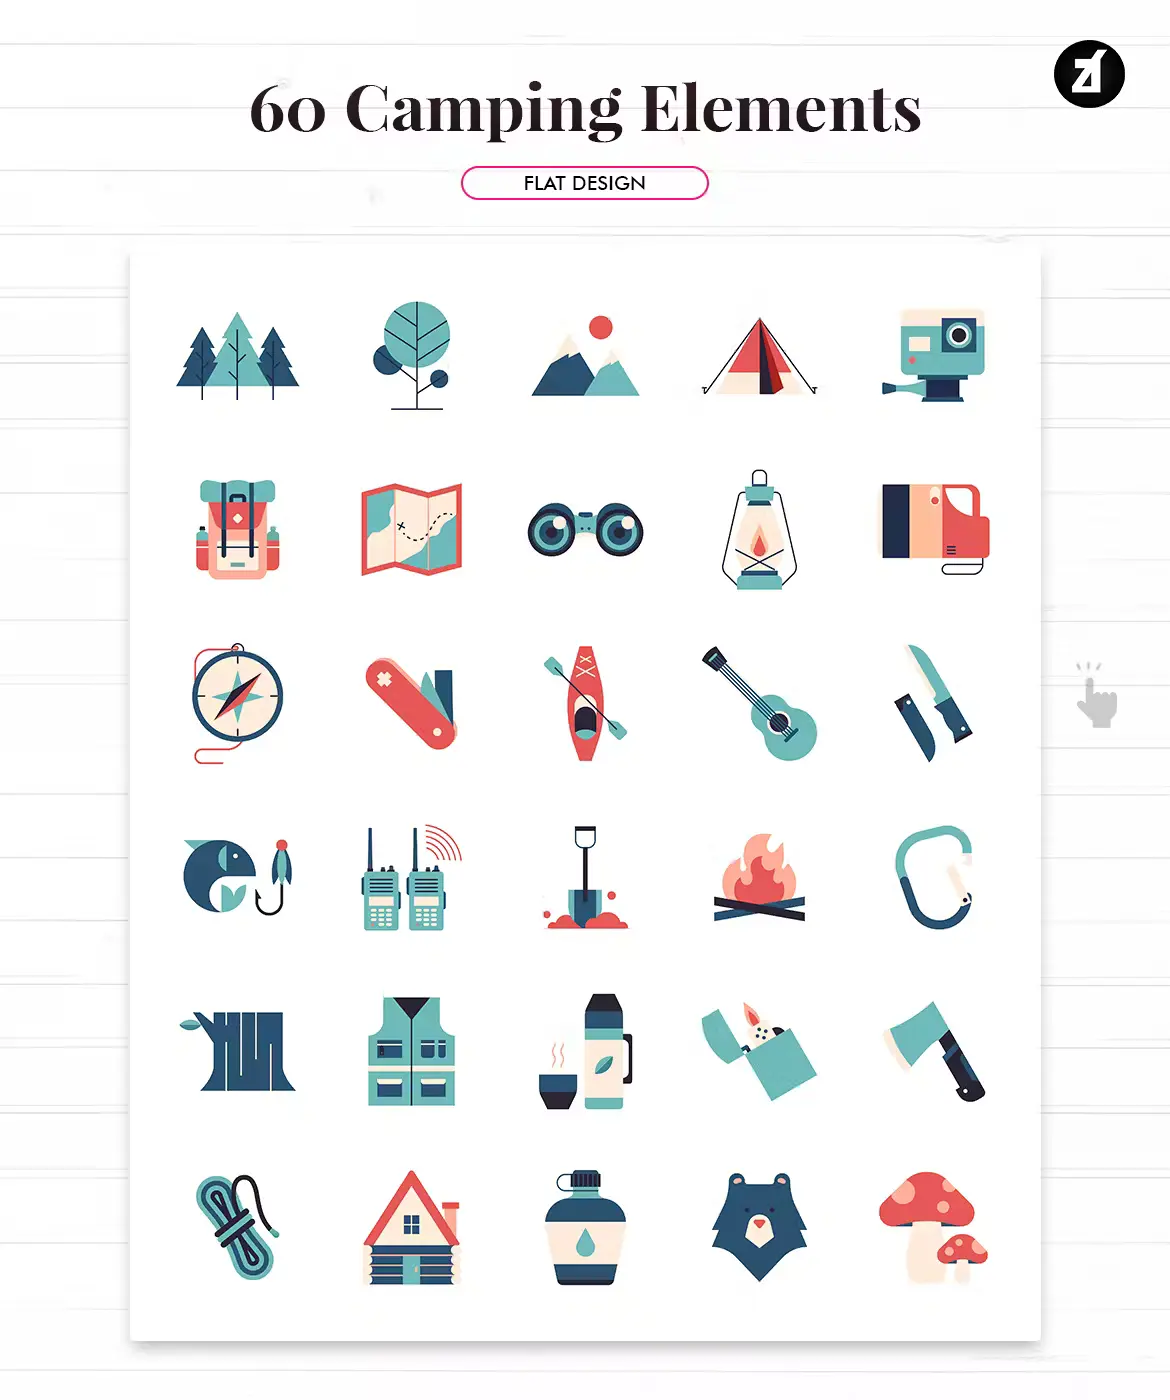 60 Camping Elements 2